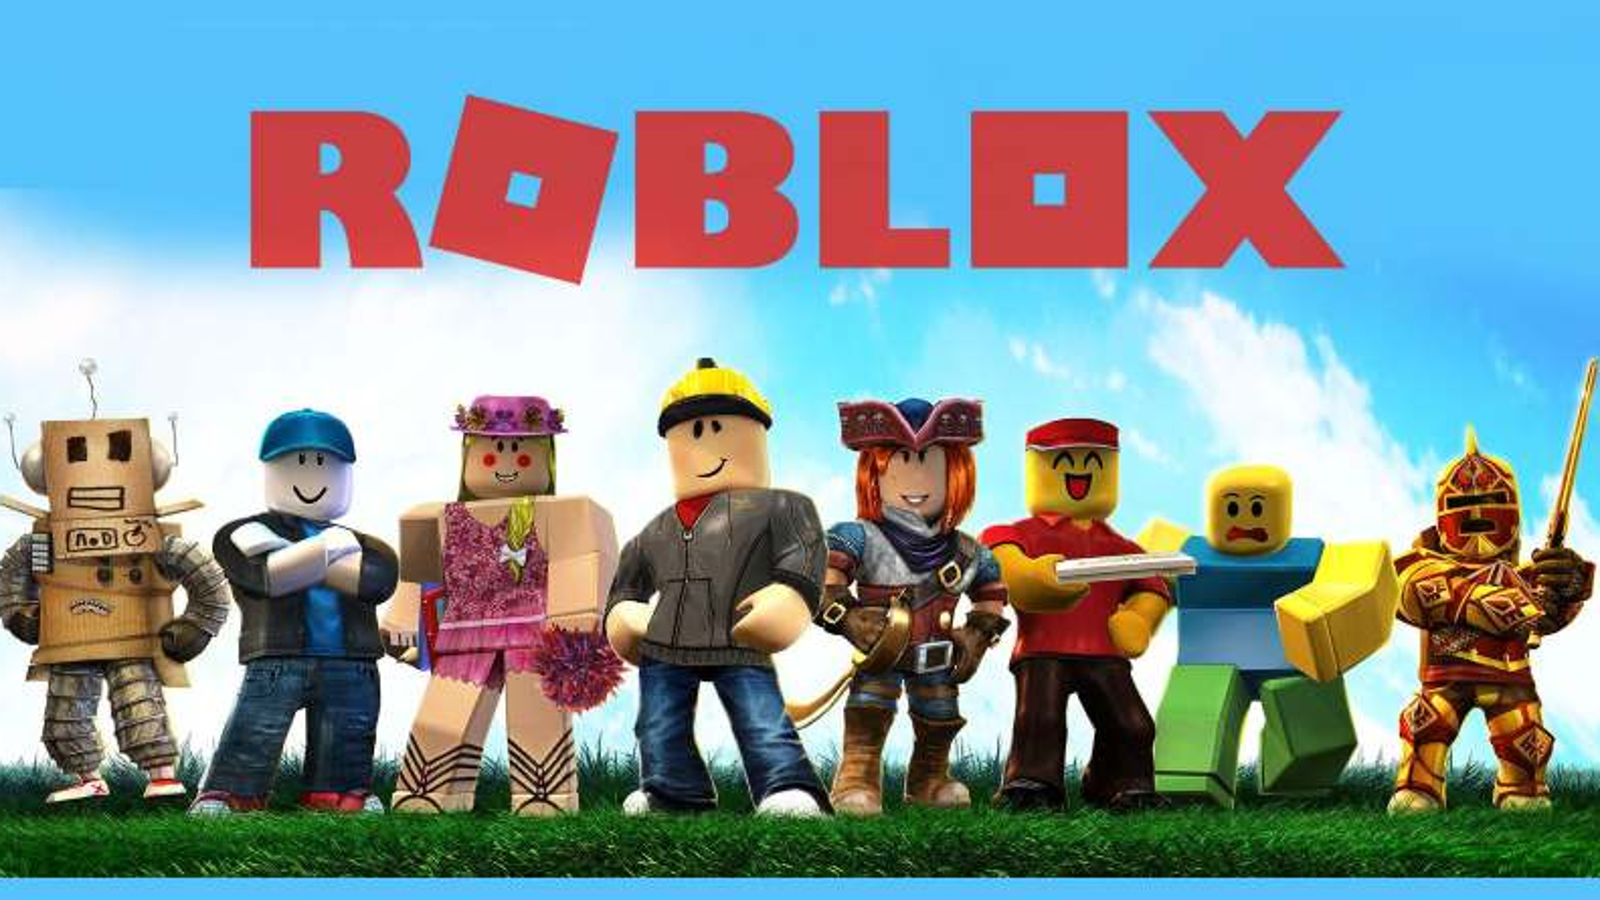 Roblox connected